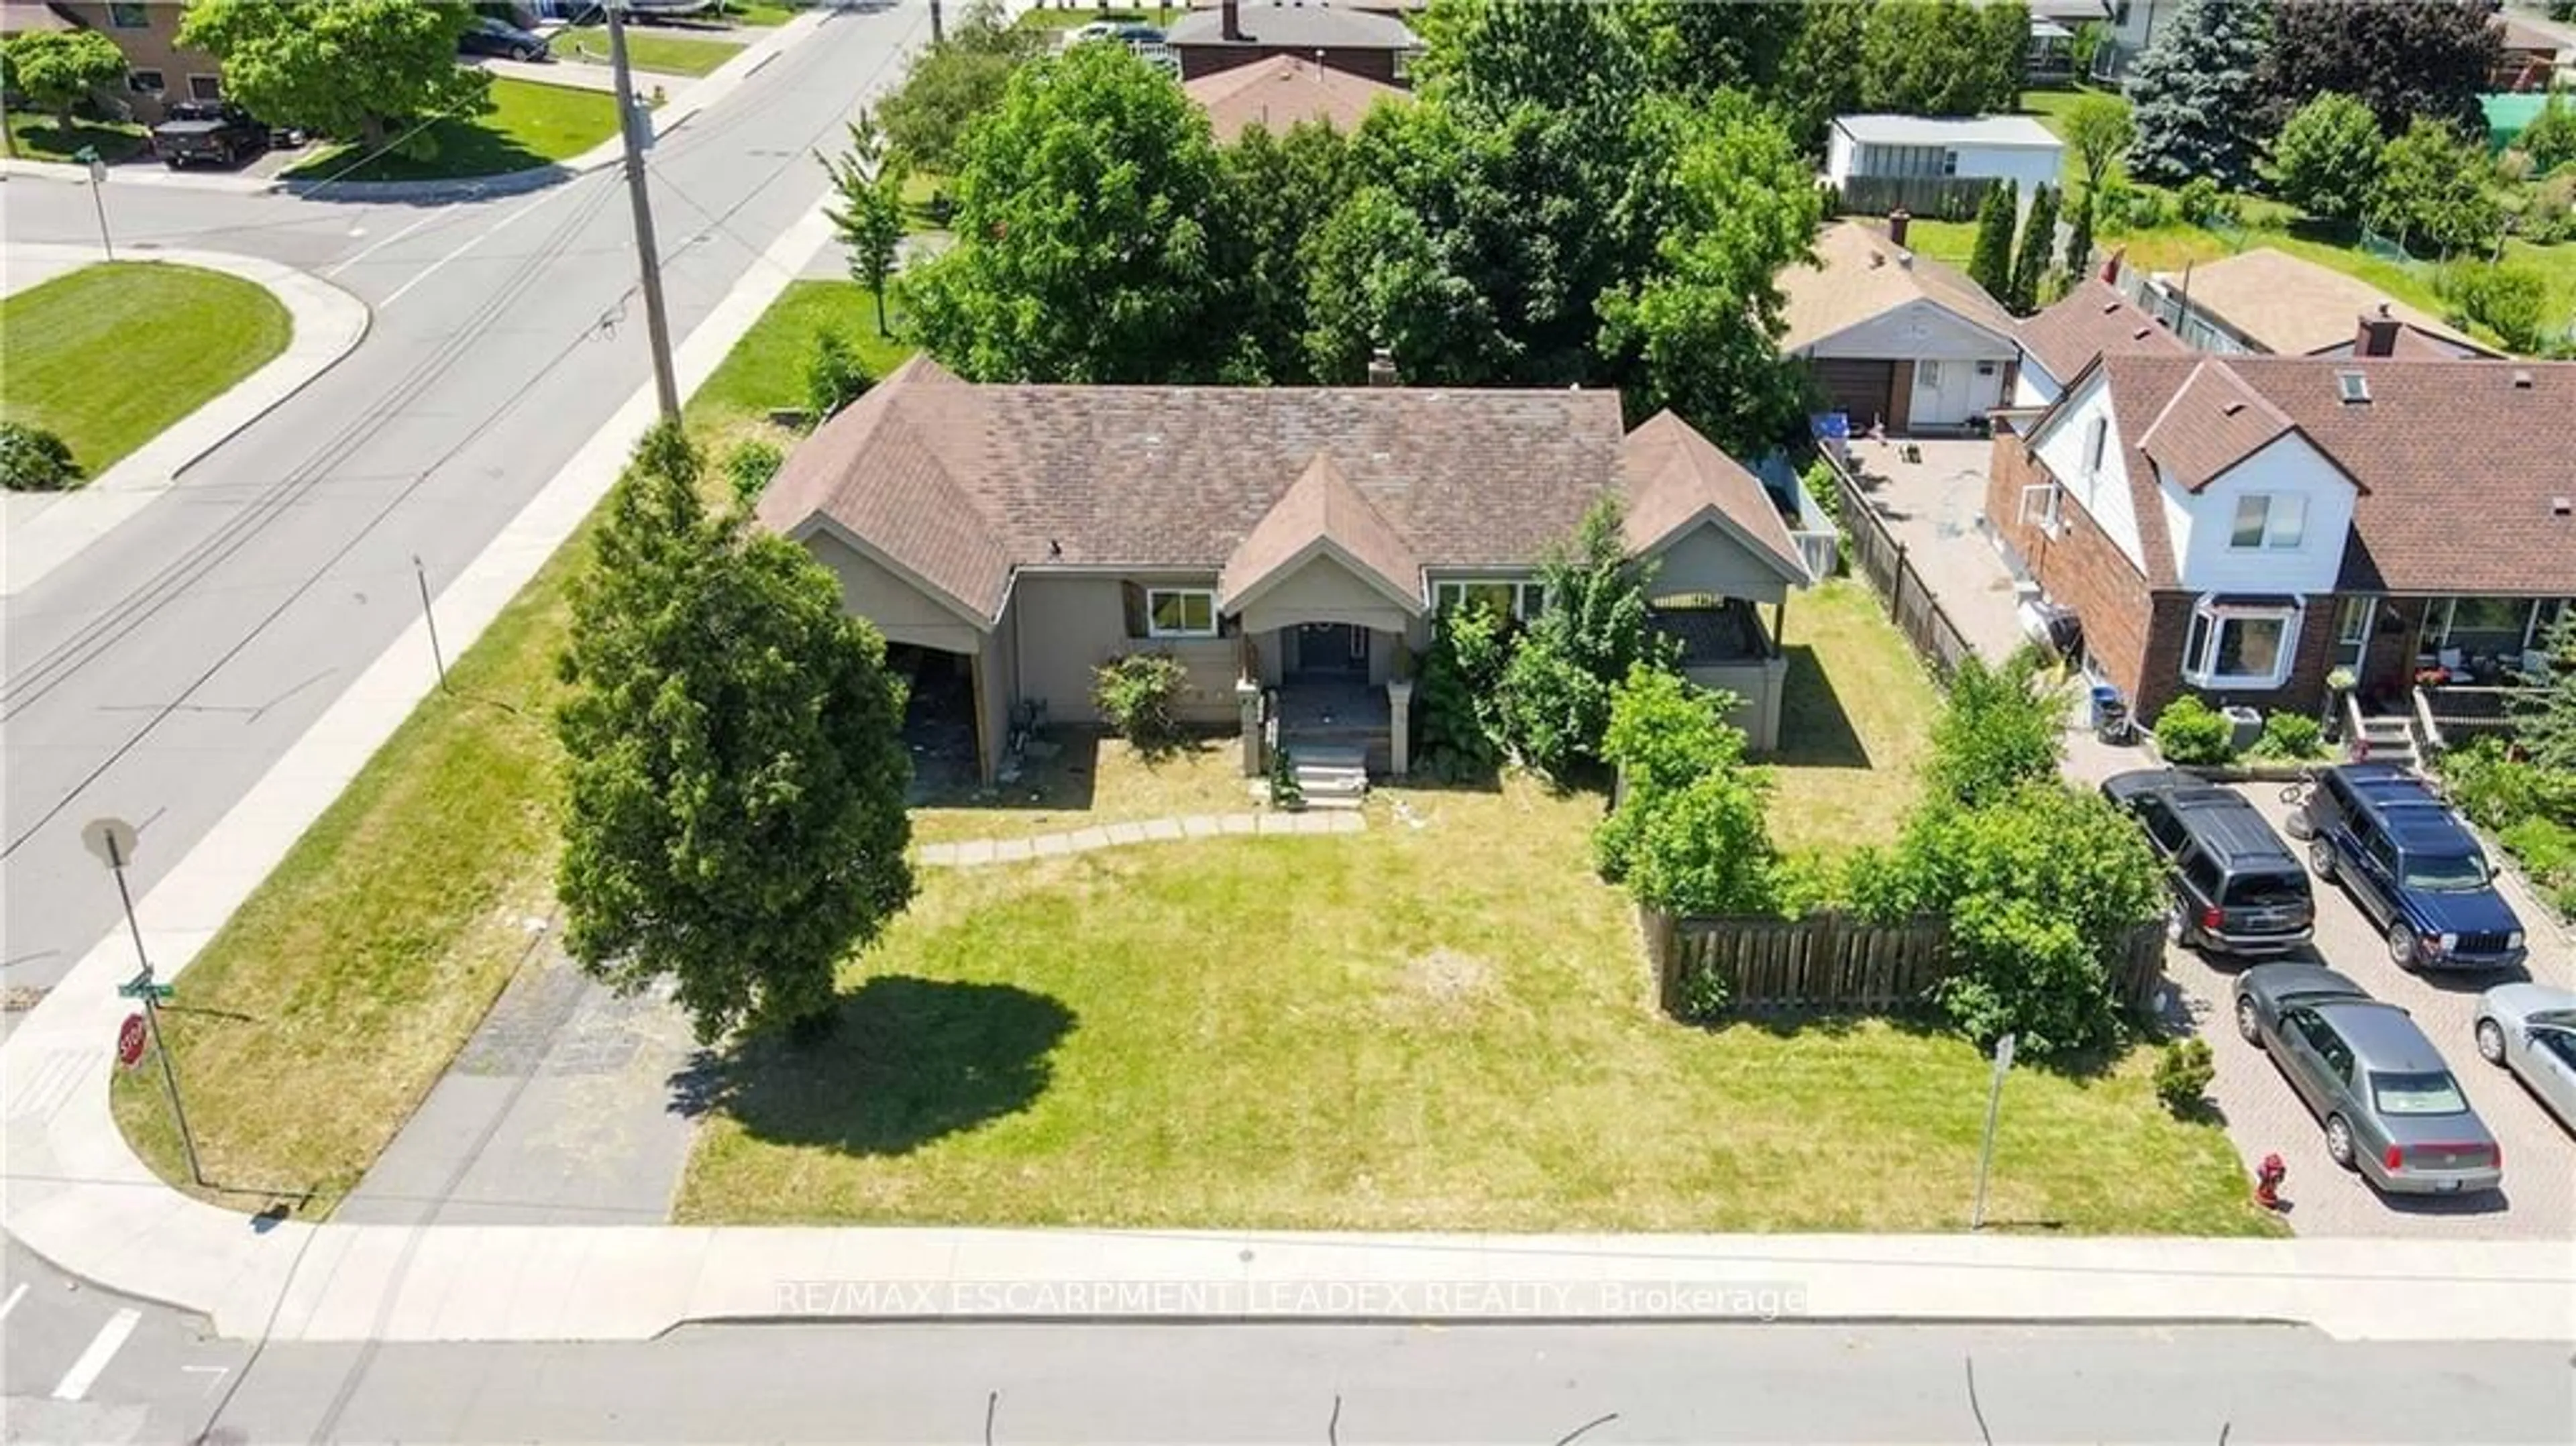 Frontside or backside of a home for 368 Caledon Ave, Hamilton Ontario L9C 3E3